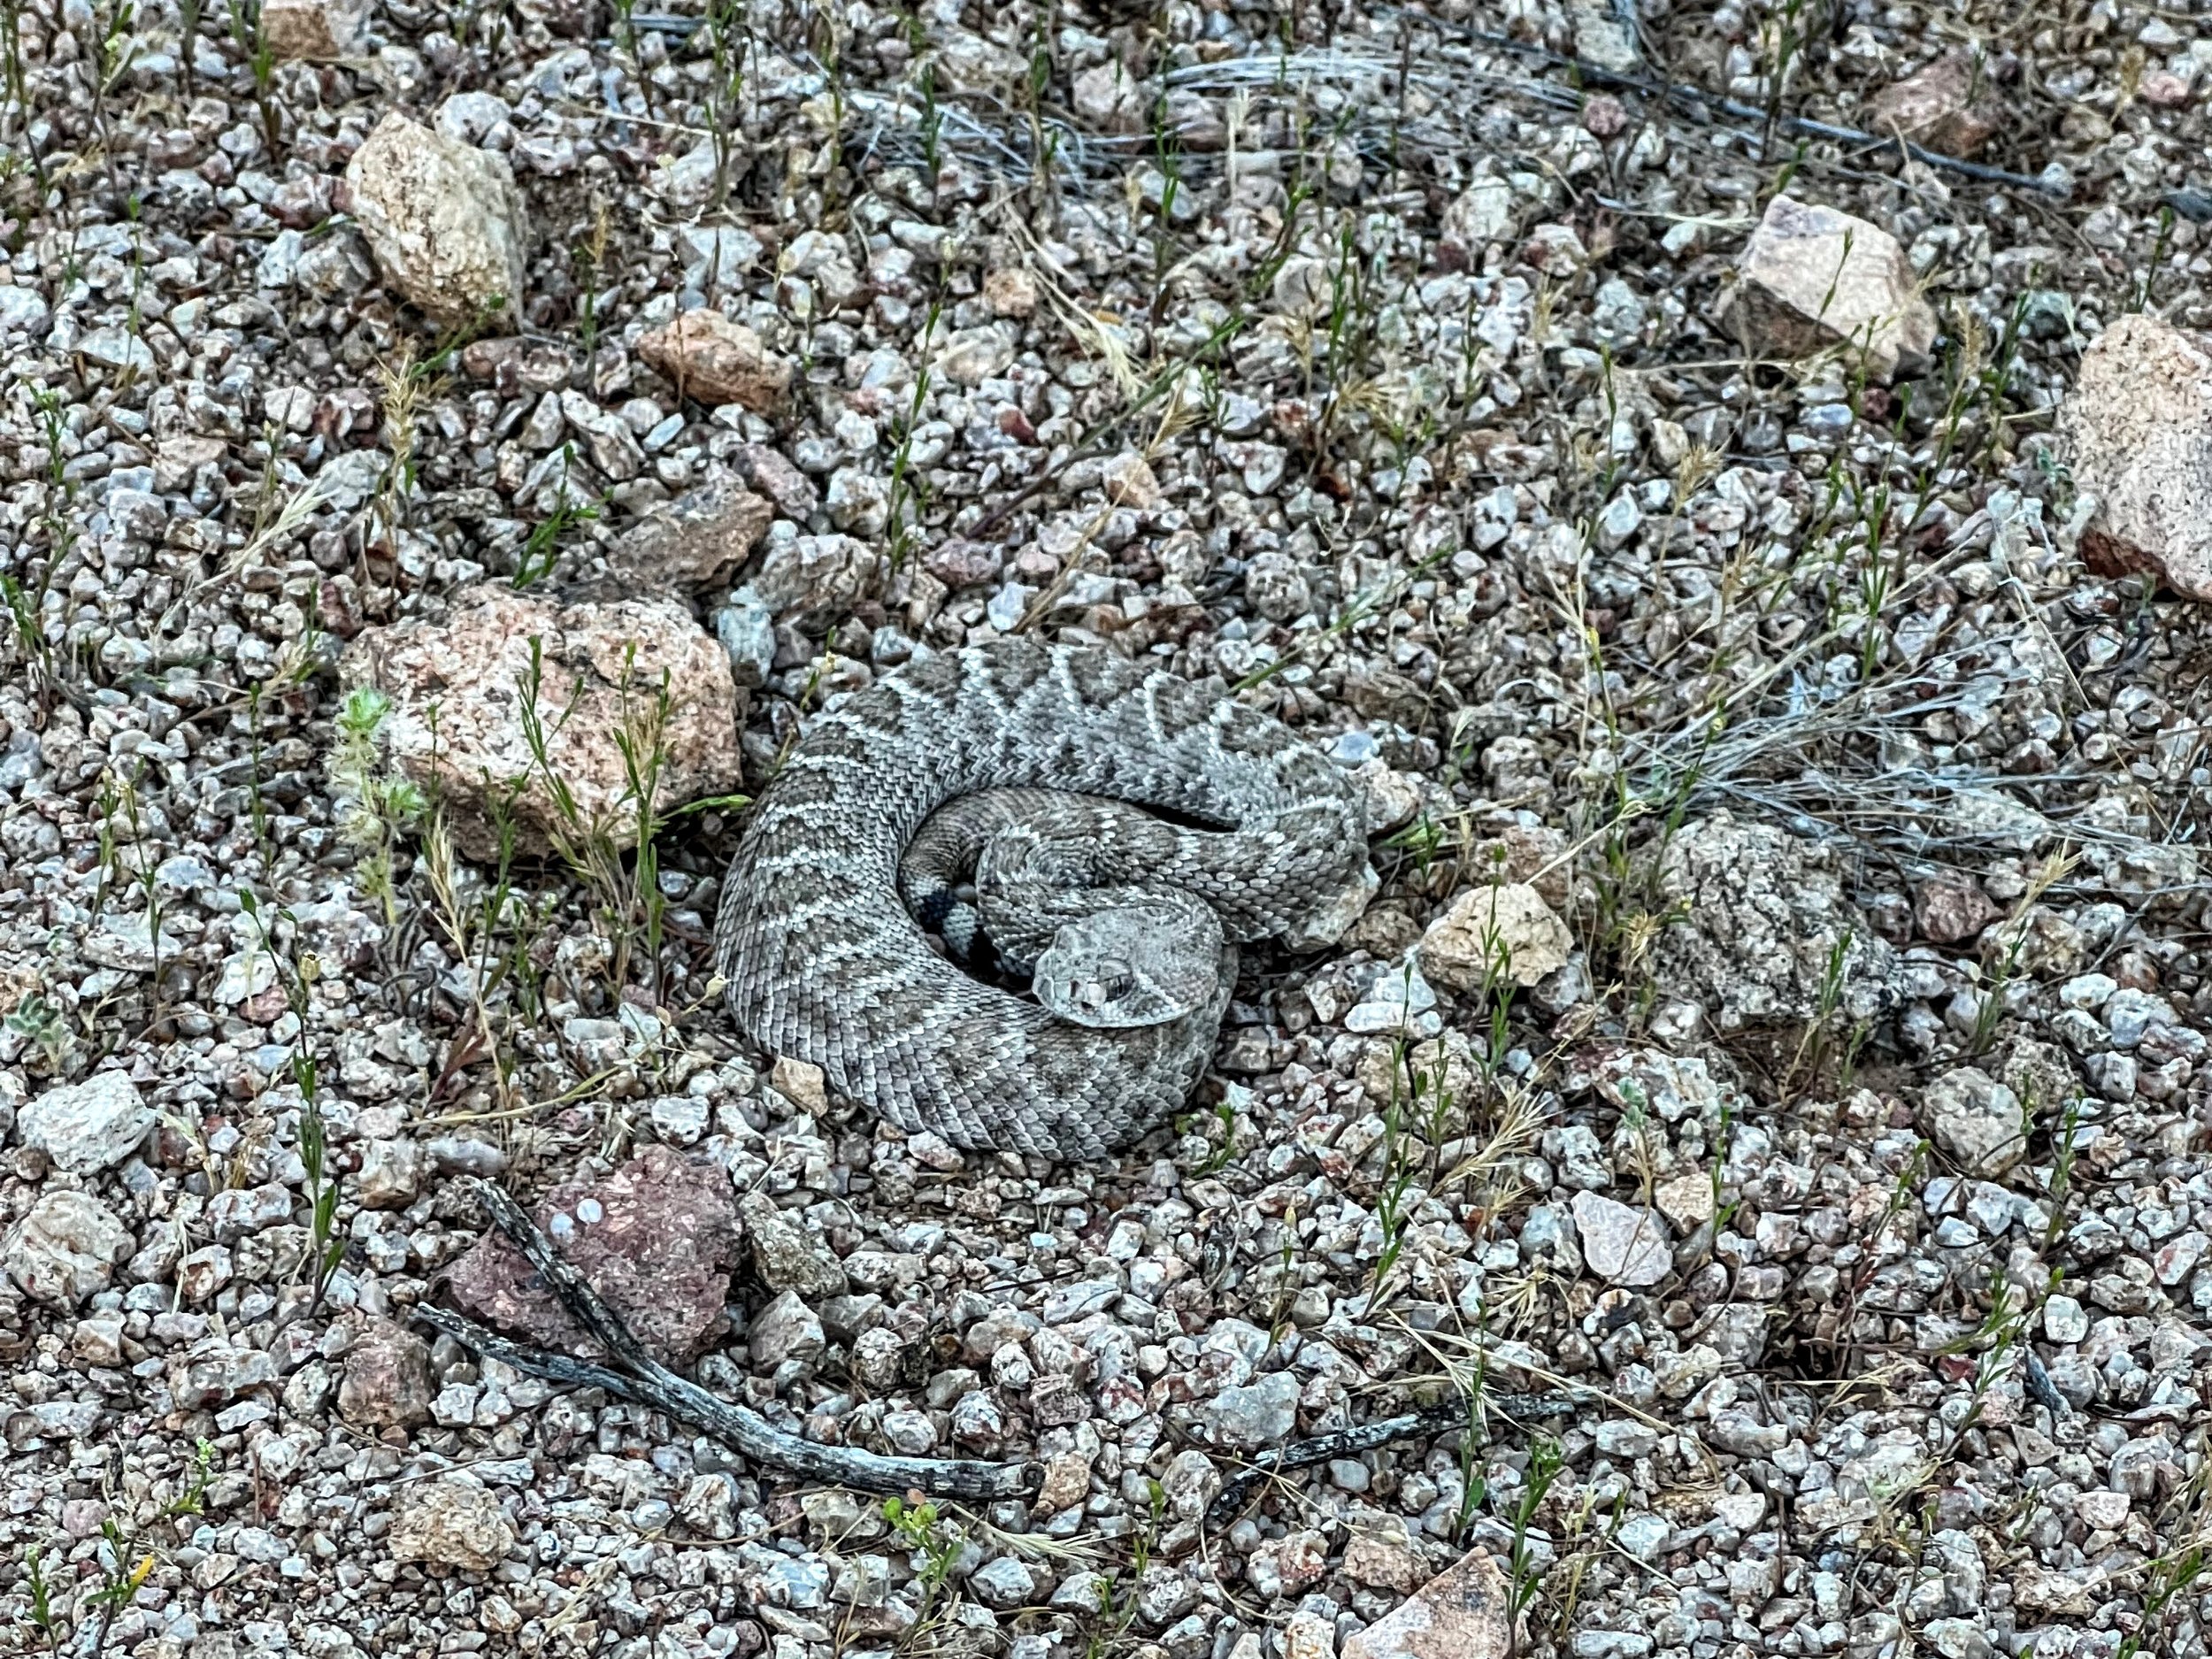 Rattlesnakes are a constant concern on the AZT